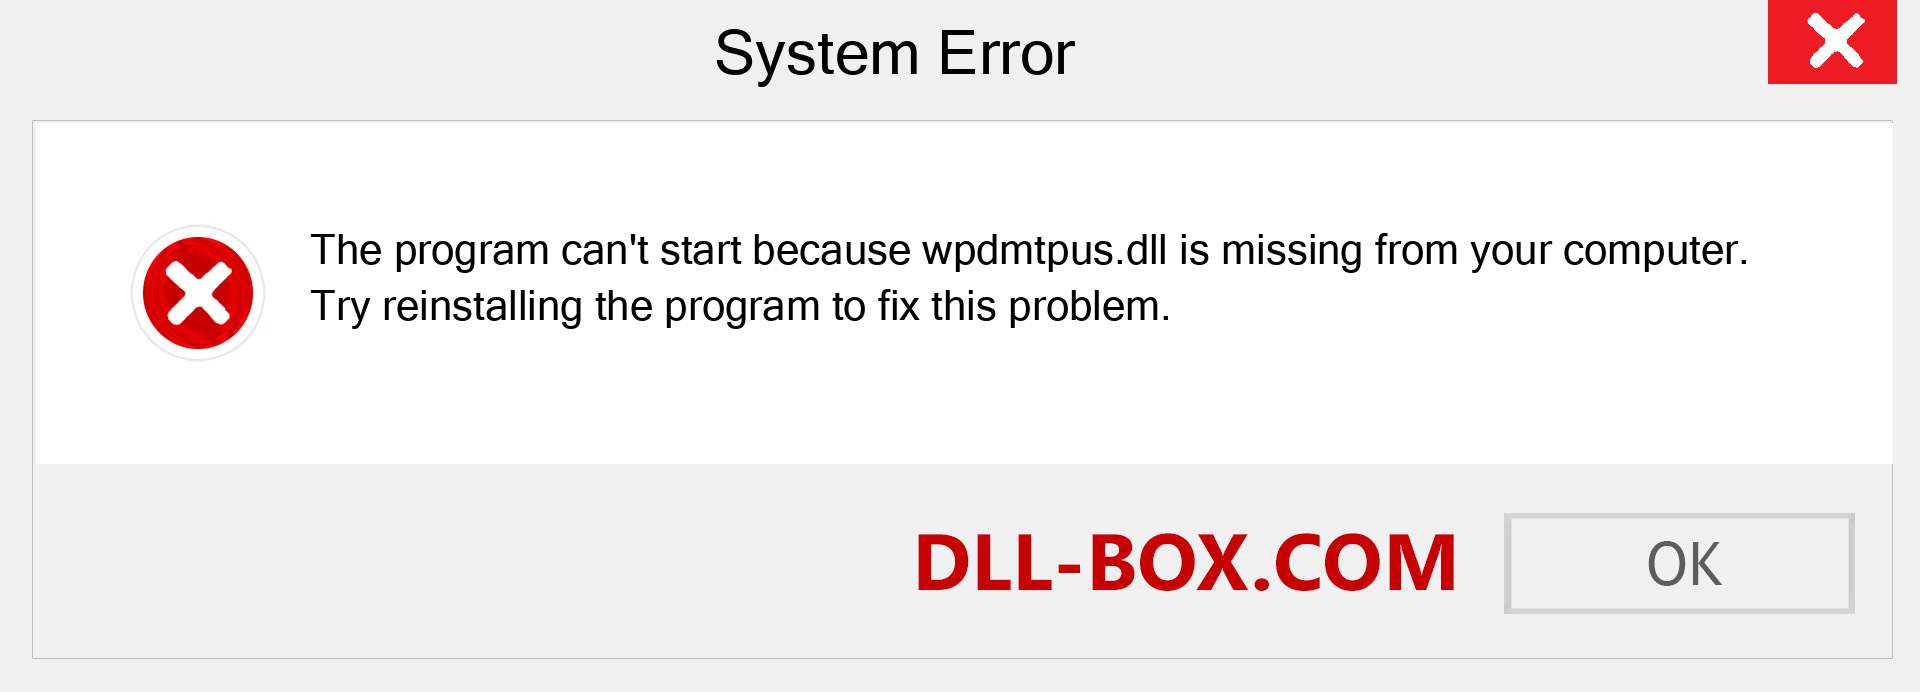  wpdmtpus.dll file is missing?. Download for Windows 7, 8, 10 - Fix  wpdmtpus dll Missing Error on Windows, photos, images